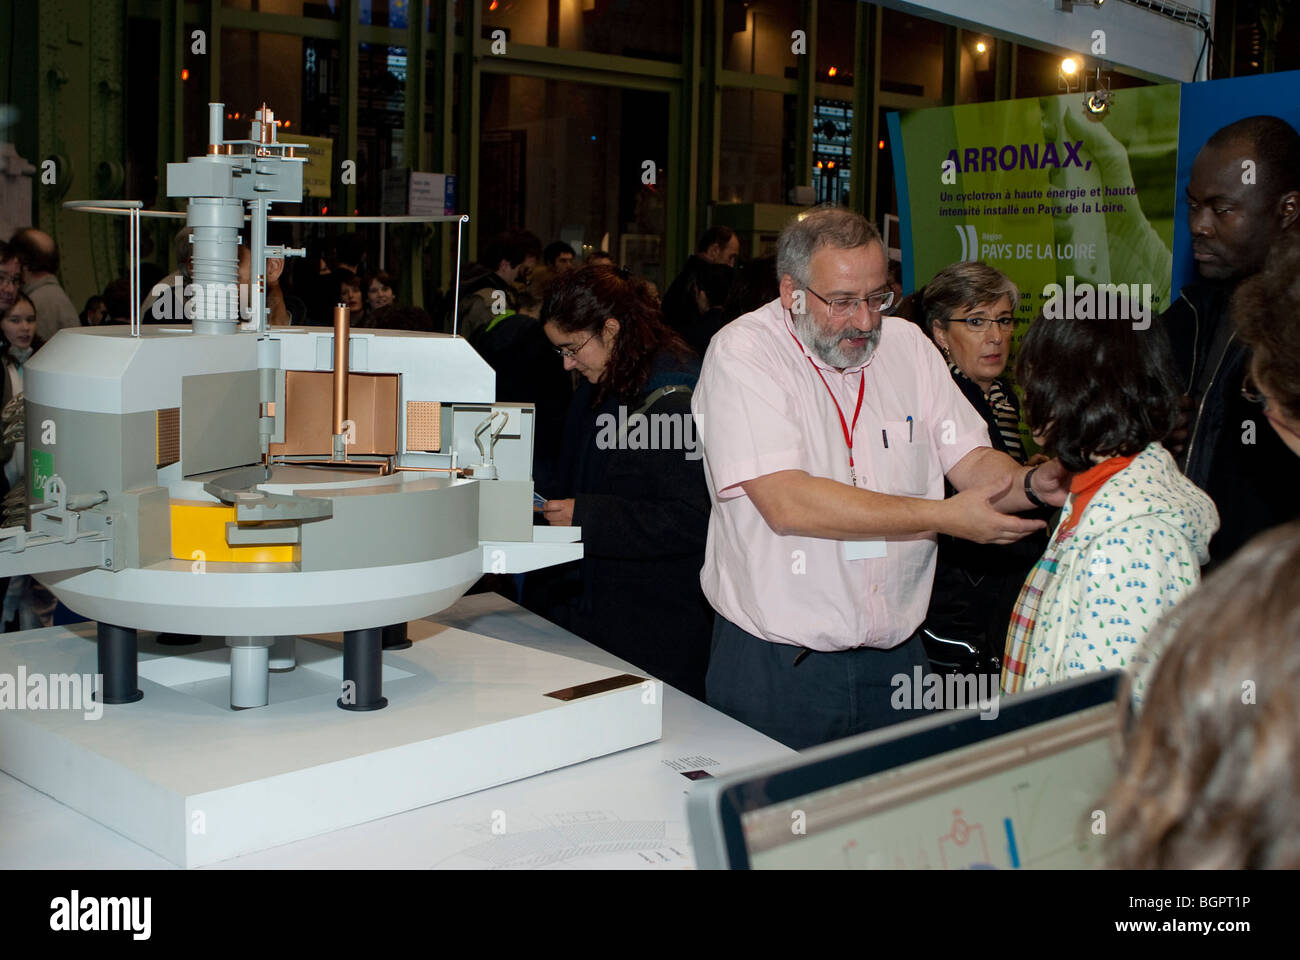 Paris, France, French Scientists, Talking Sharing Cyclotron Model at 'Fete de la Science', French National 'Science Fair', scientist presentation, experts Stock Photo